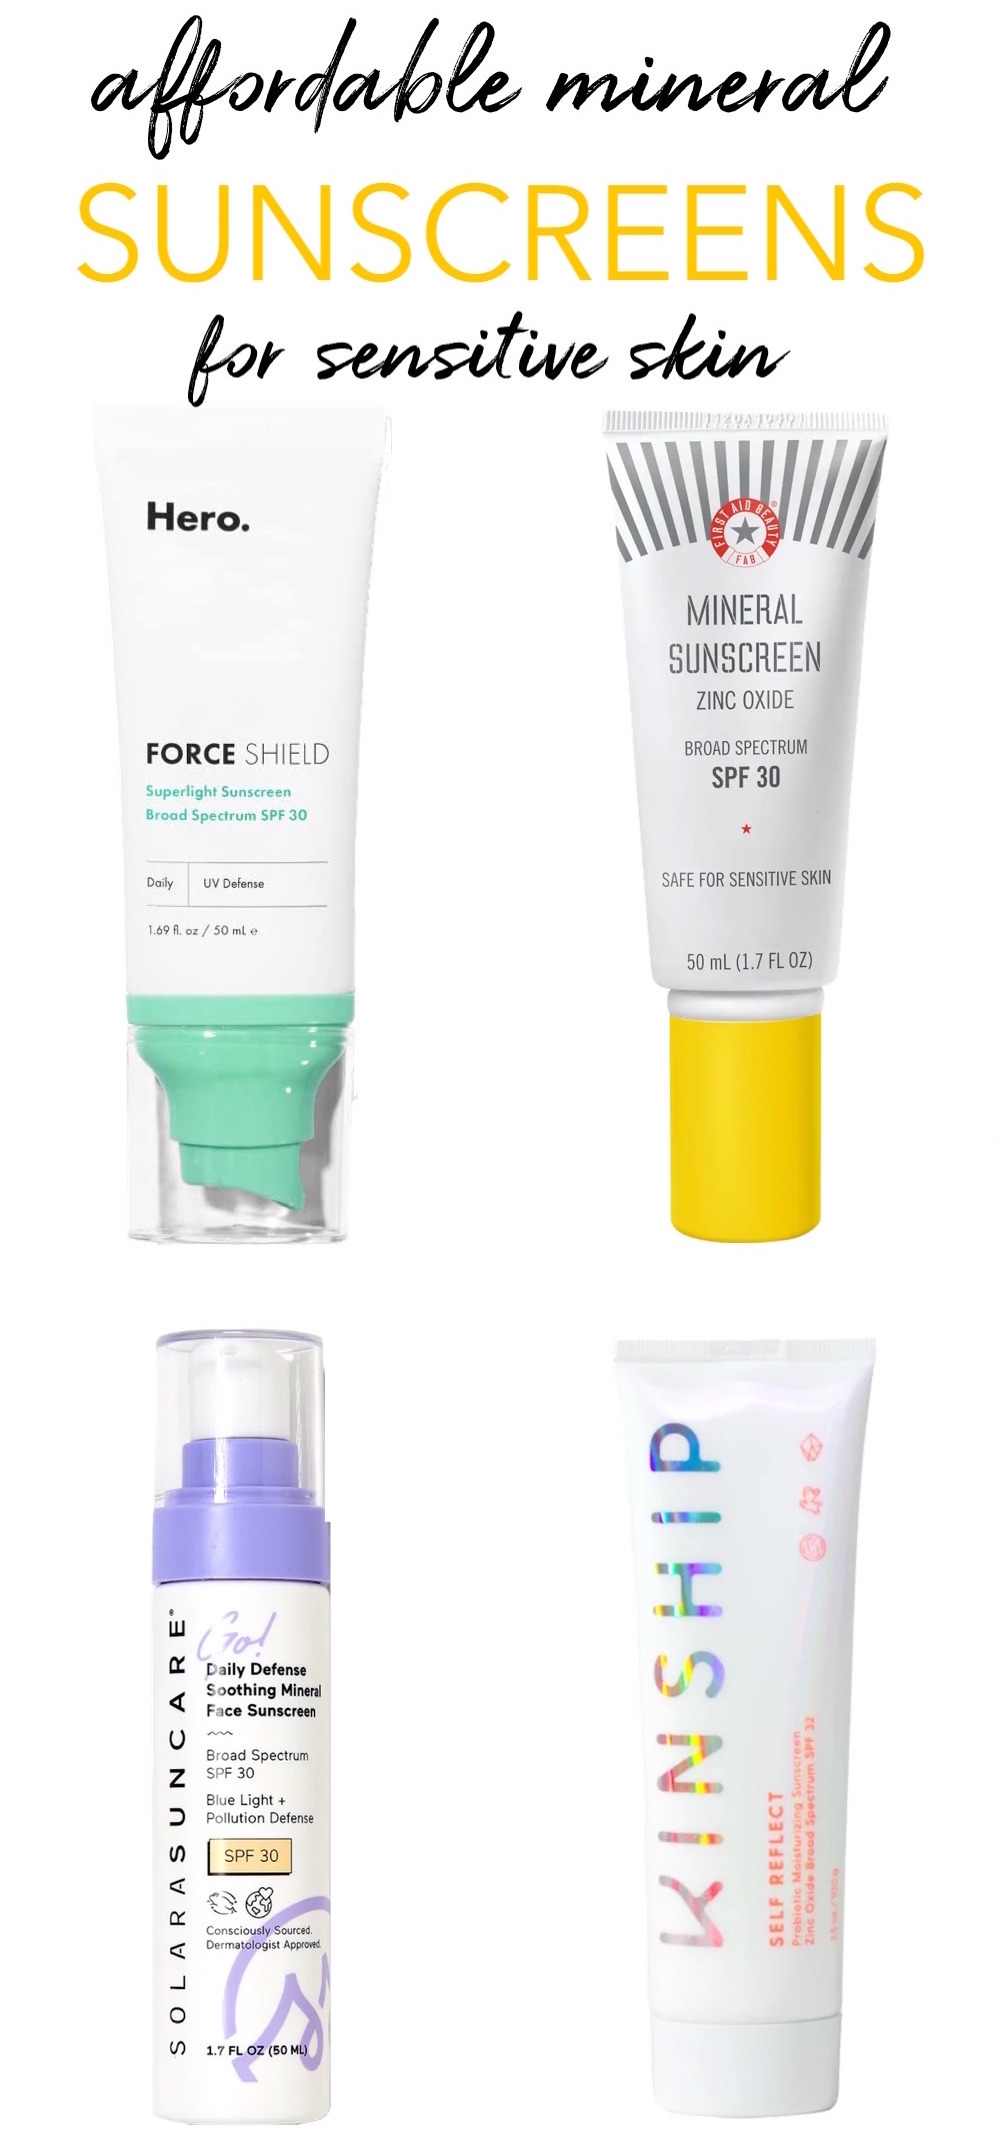 White cast, begone! These gentle and affordable mineral sunscreens are lightweight with absolutely NO white cast or greasiness, won’t clog pores and wear well under makeup.